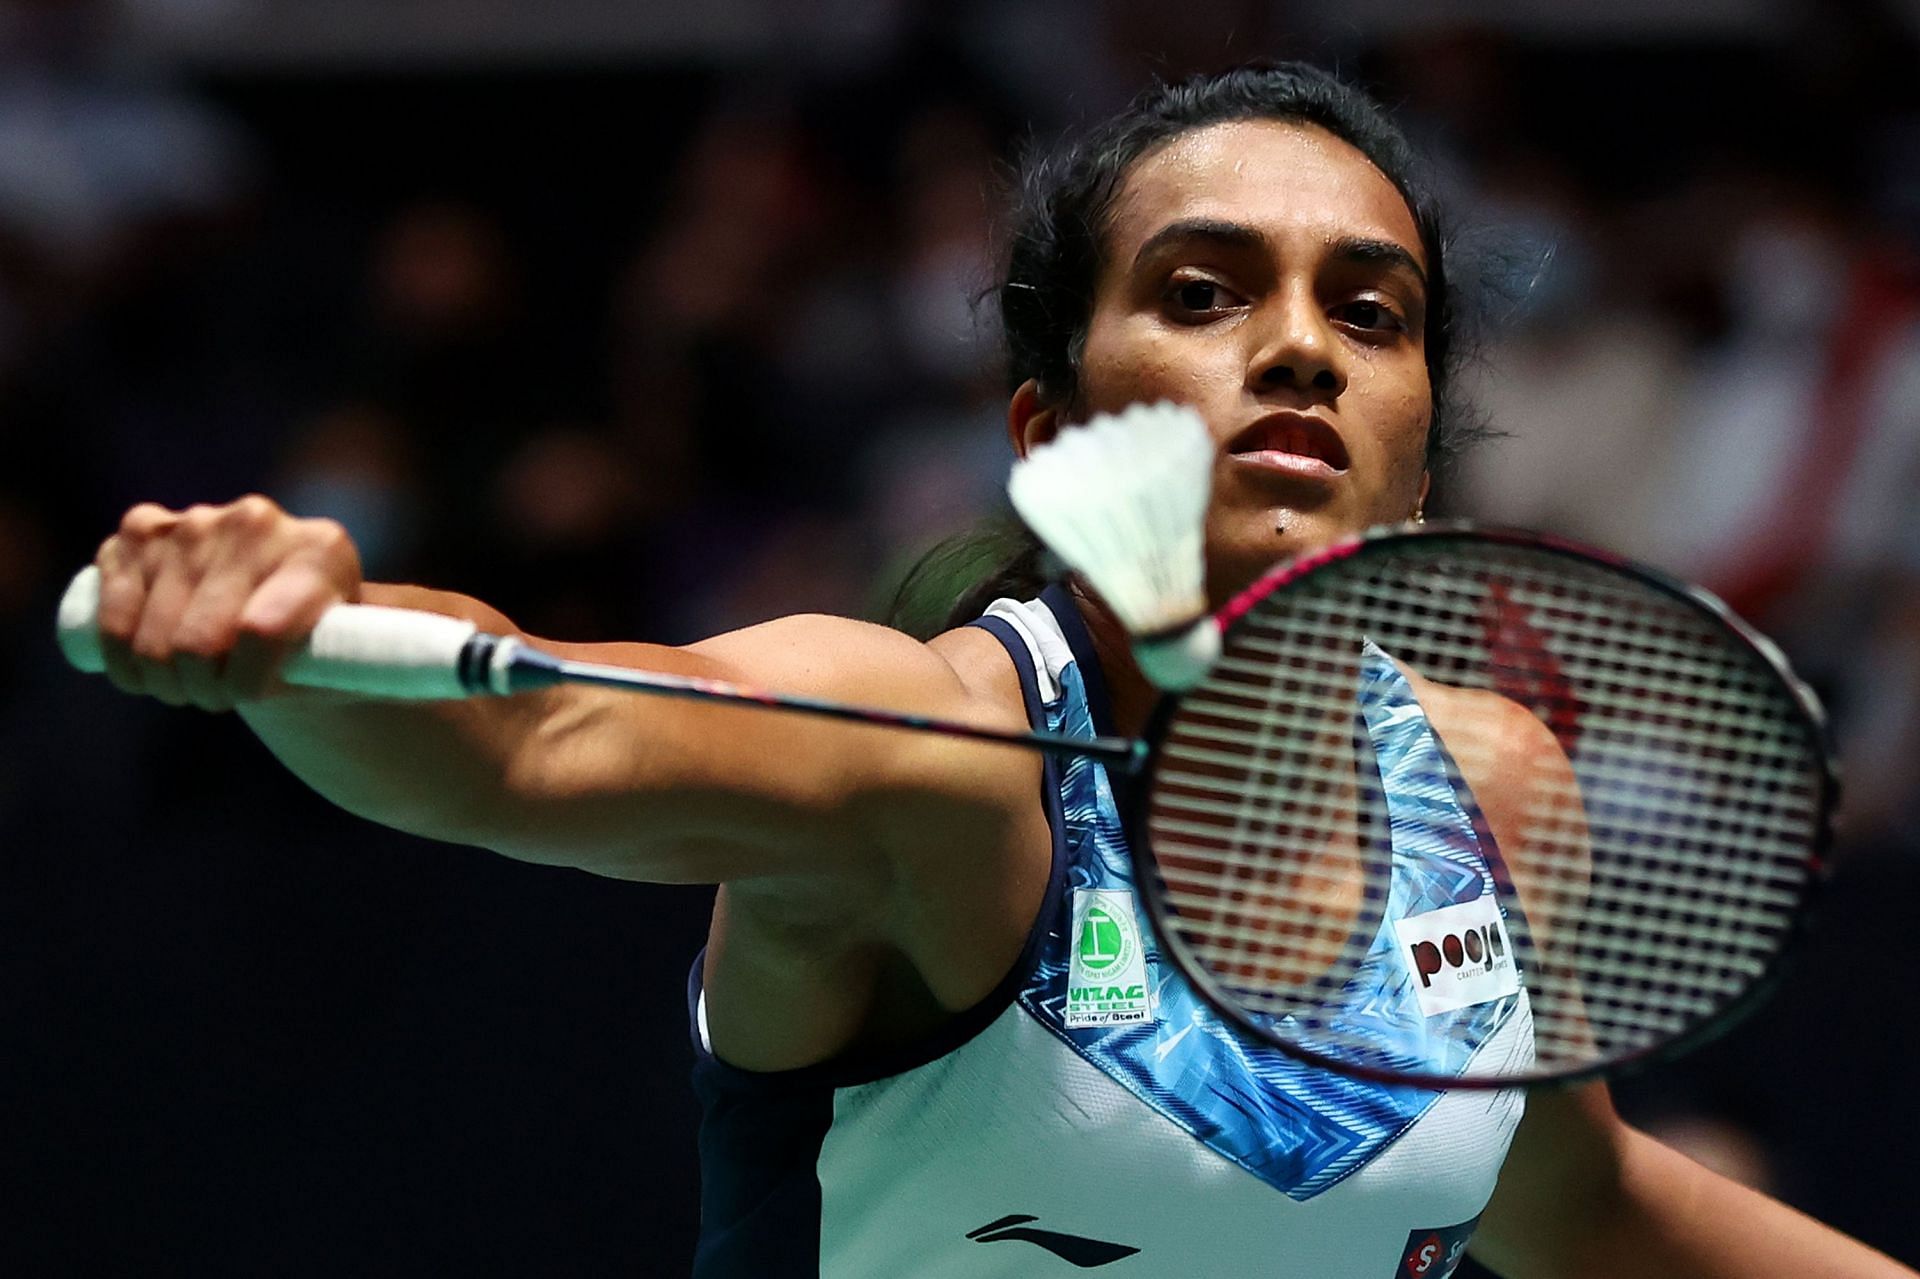 Sindhu in action at the 2022 Singapore Open (Image courtesy: Getty Images)